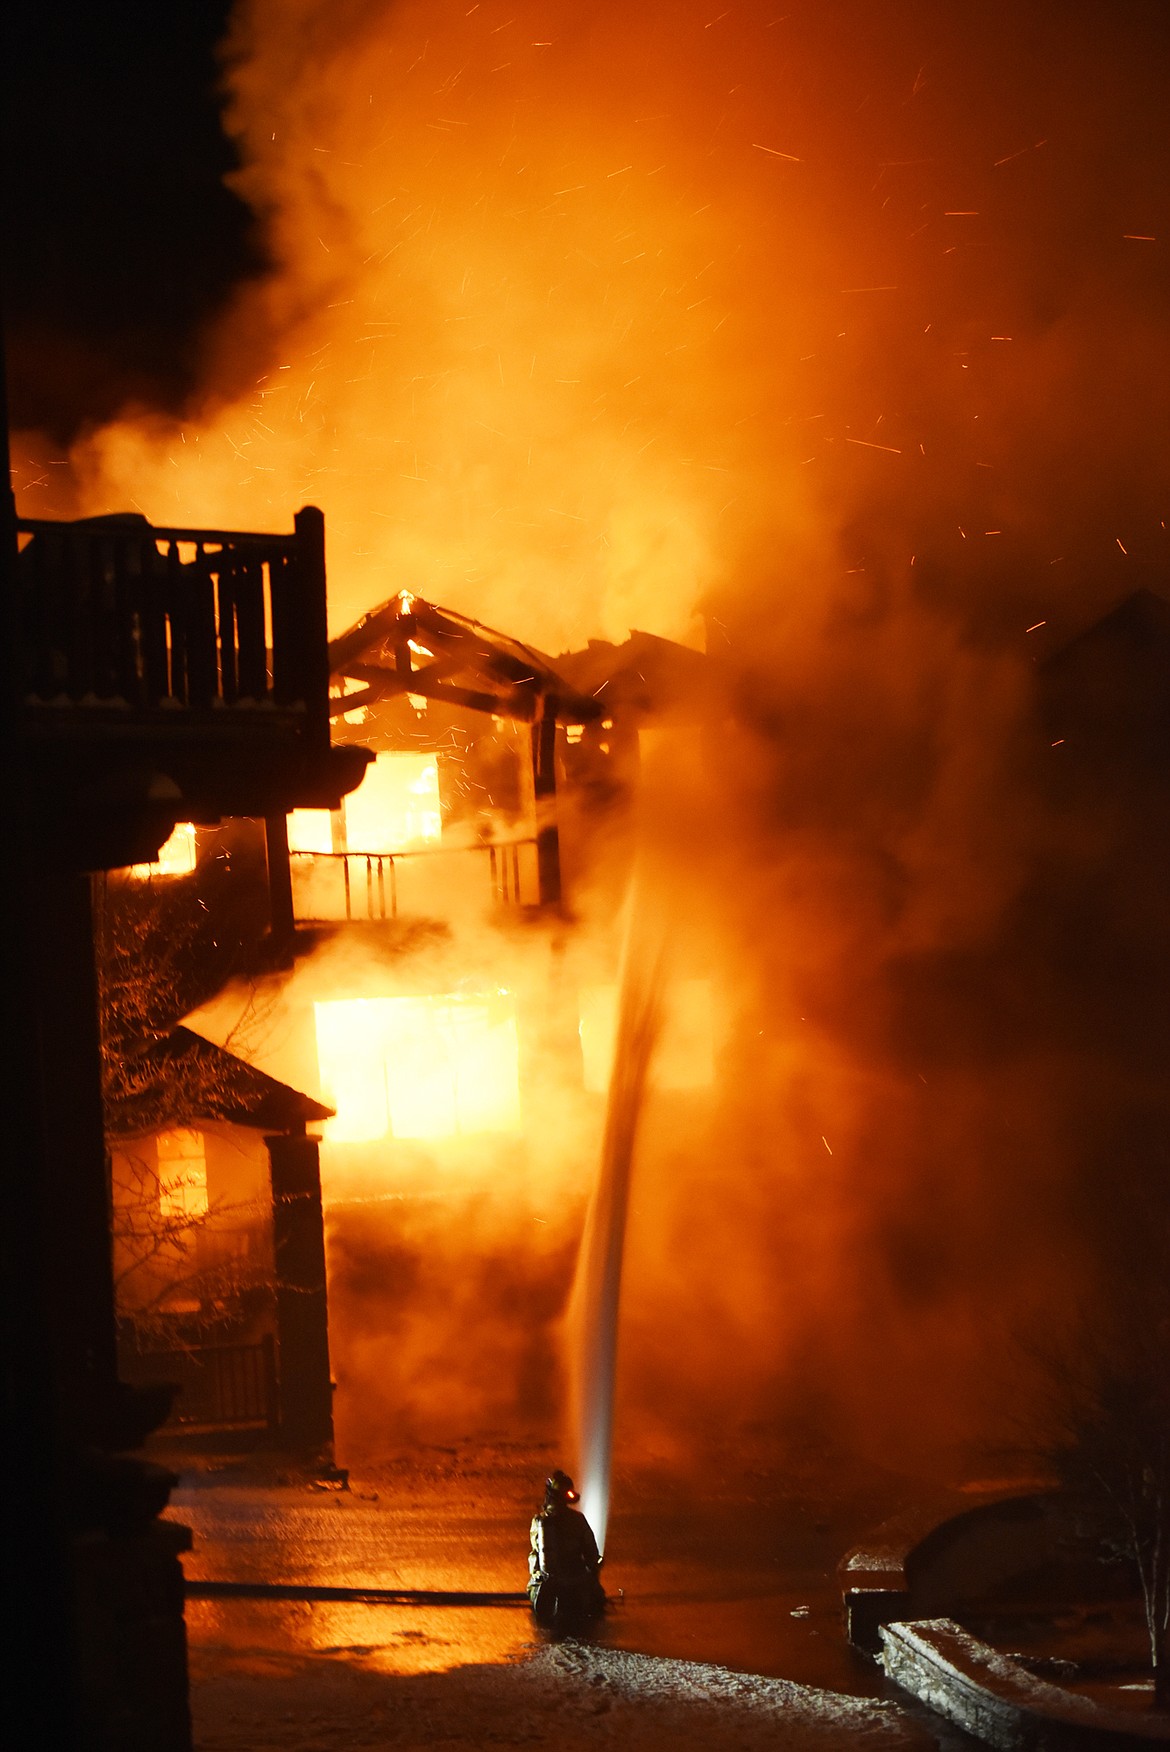 A firefighter battles a fully engulfed townhouse on Slopeside Drive on Big Mountain Thursday night. (Brenda Ahearn photos/Daily Inter Lake)